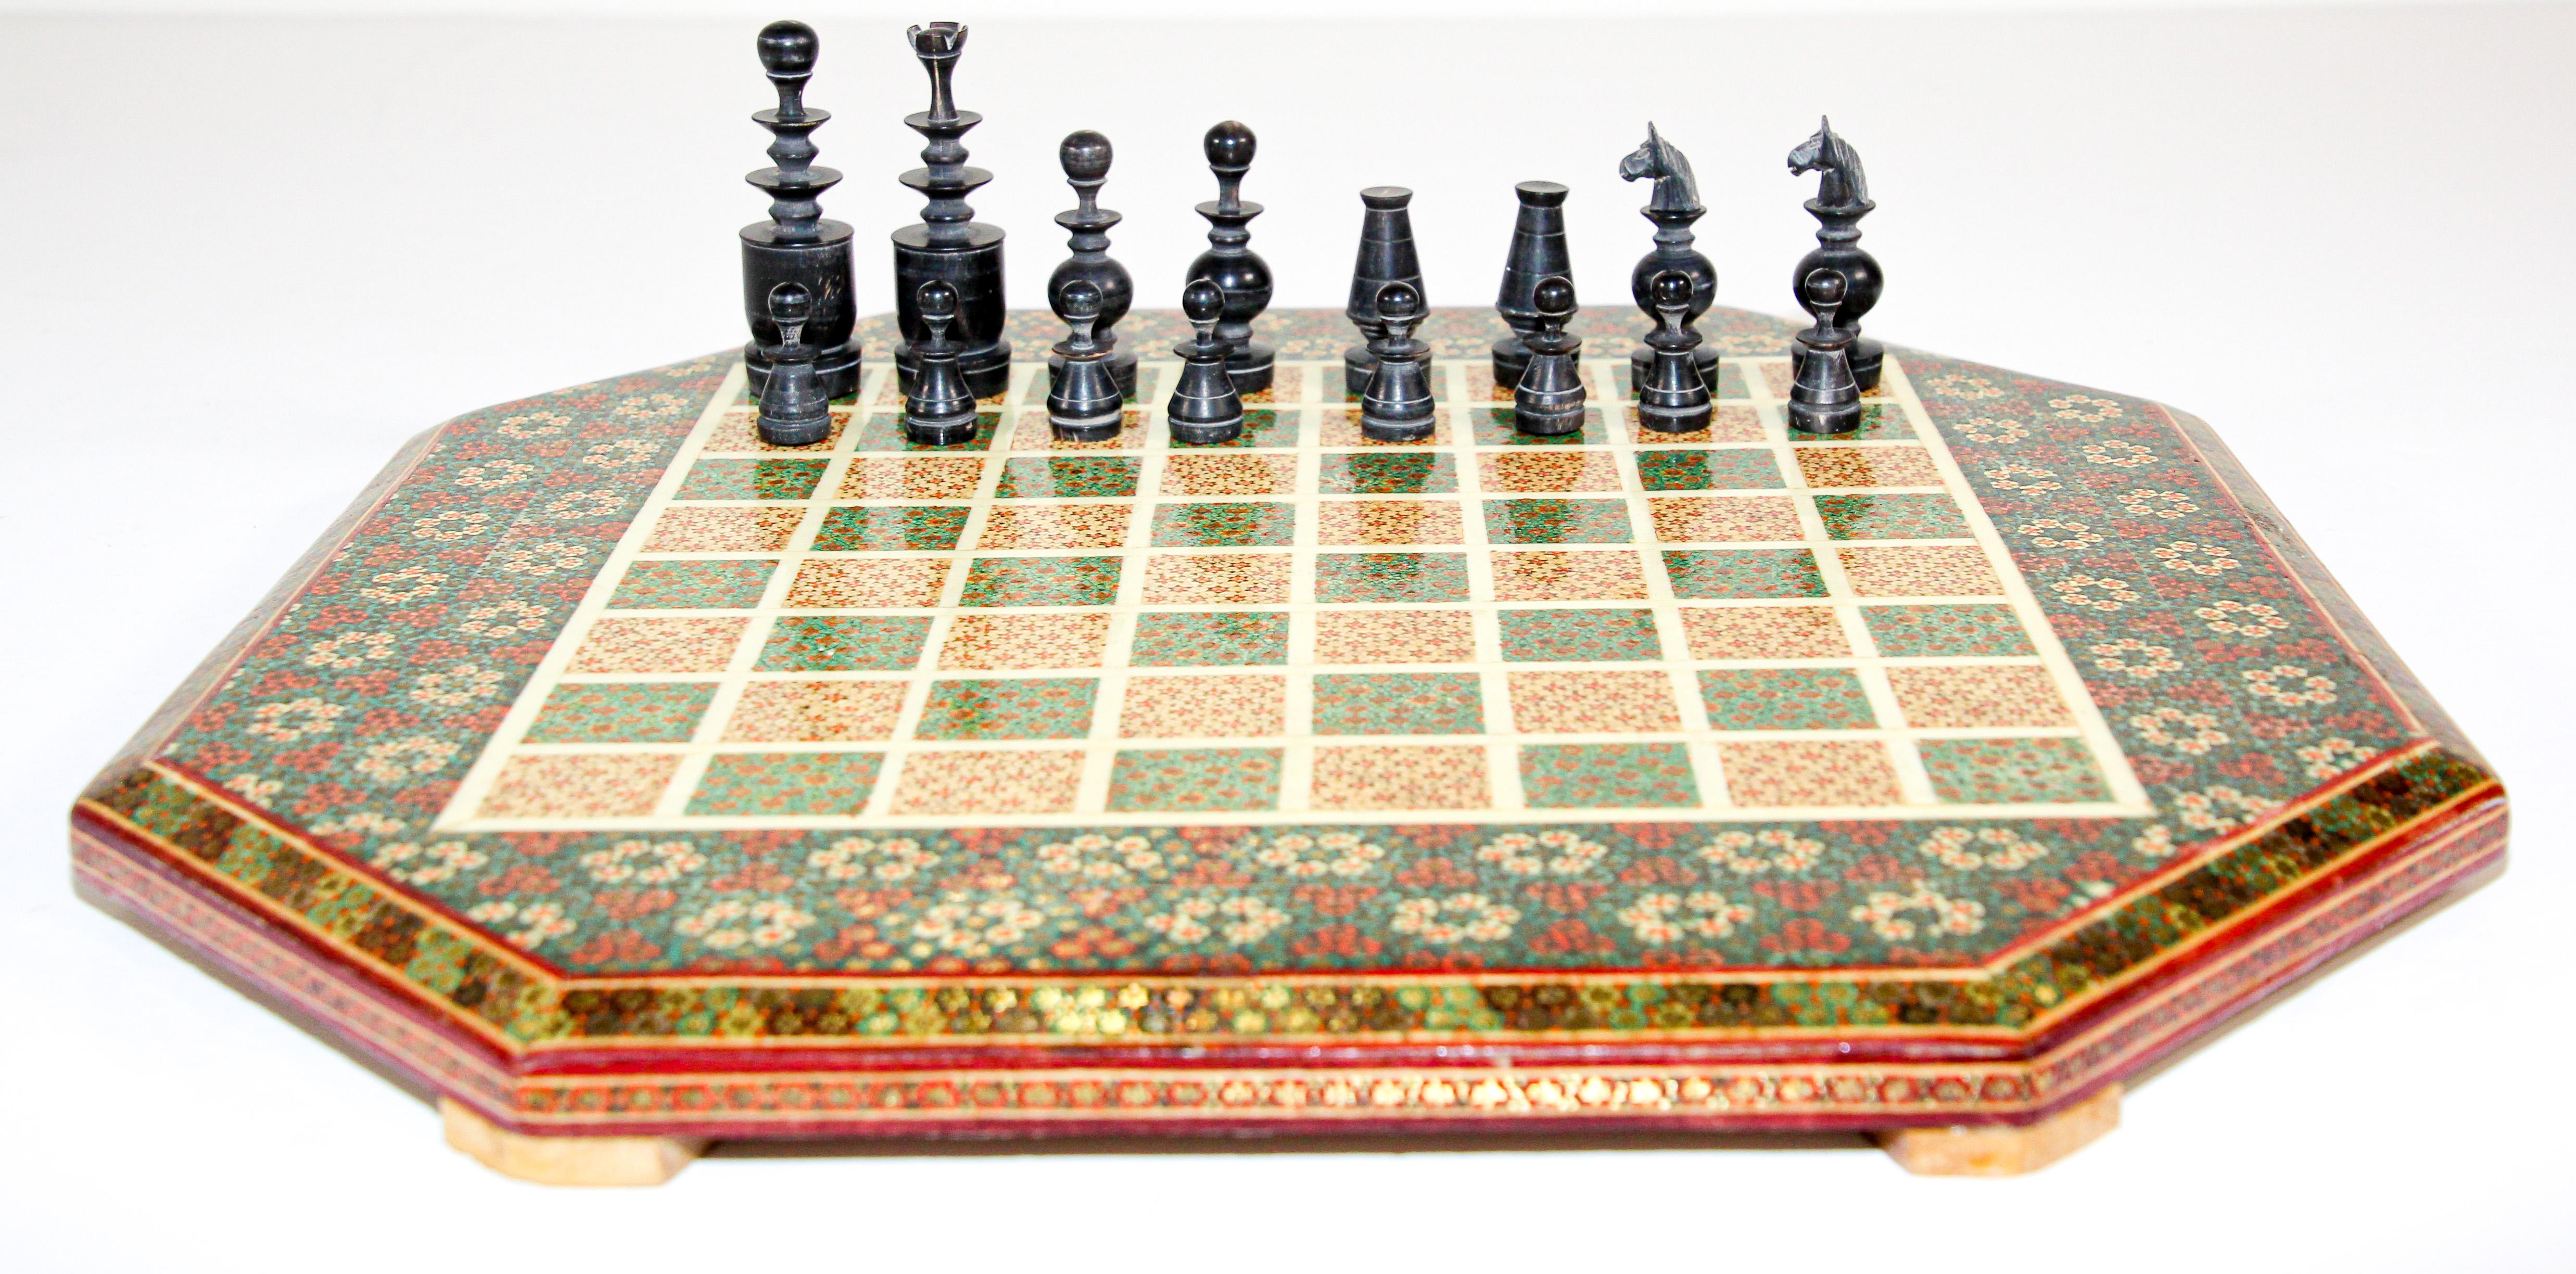 20th Century Middle Eastern Micro Mosaic Octagonal Chess Game with Horn Pieces For Sale